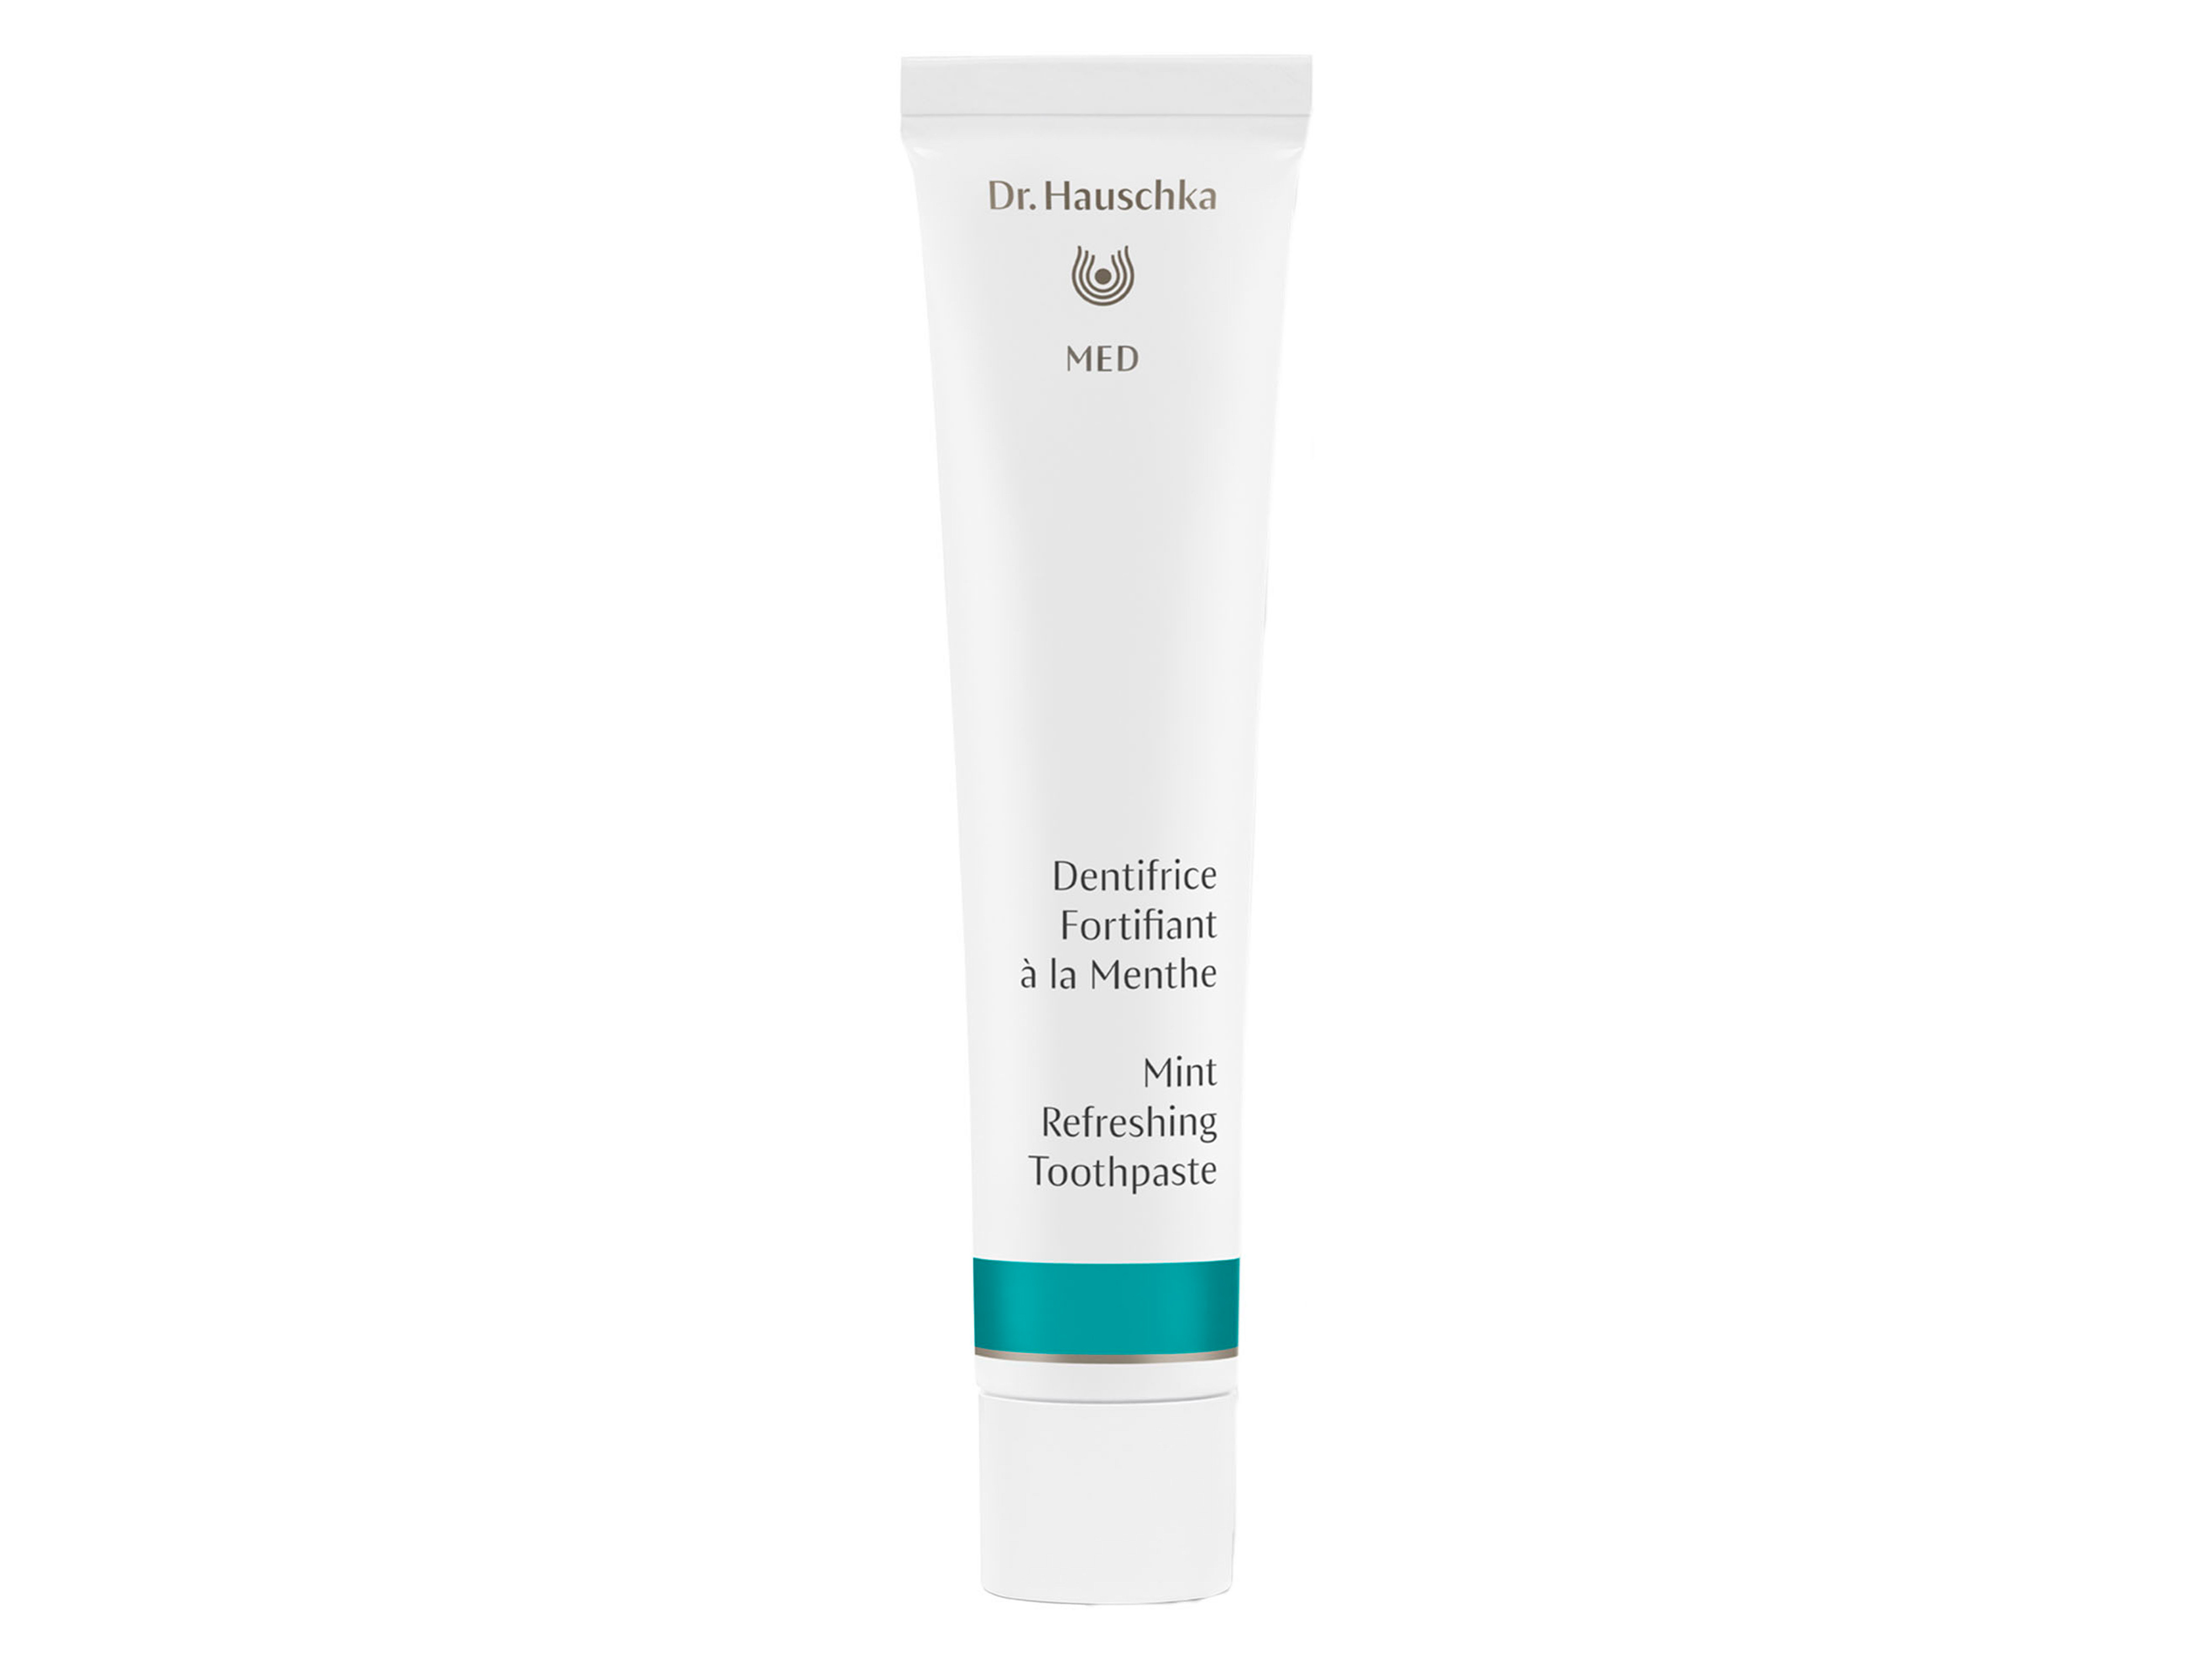 Dr. Hauschka MED Mint Refreshing Toothpaste, 75 ml